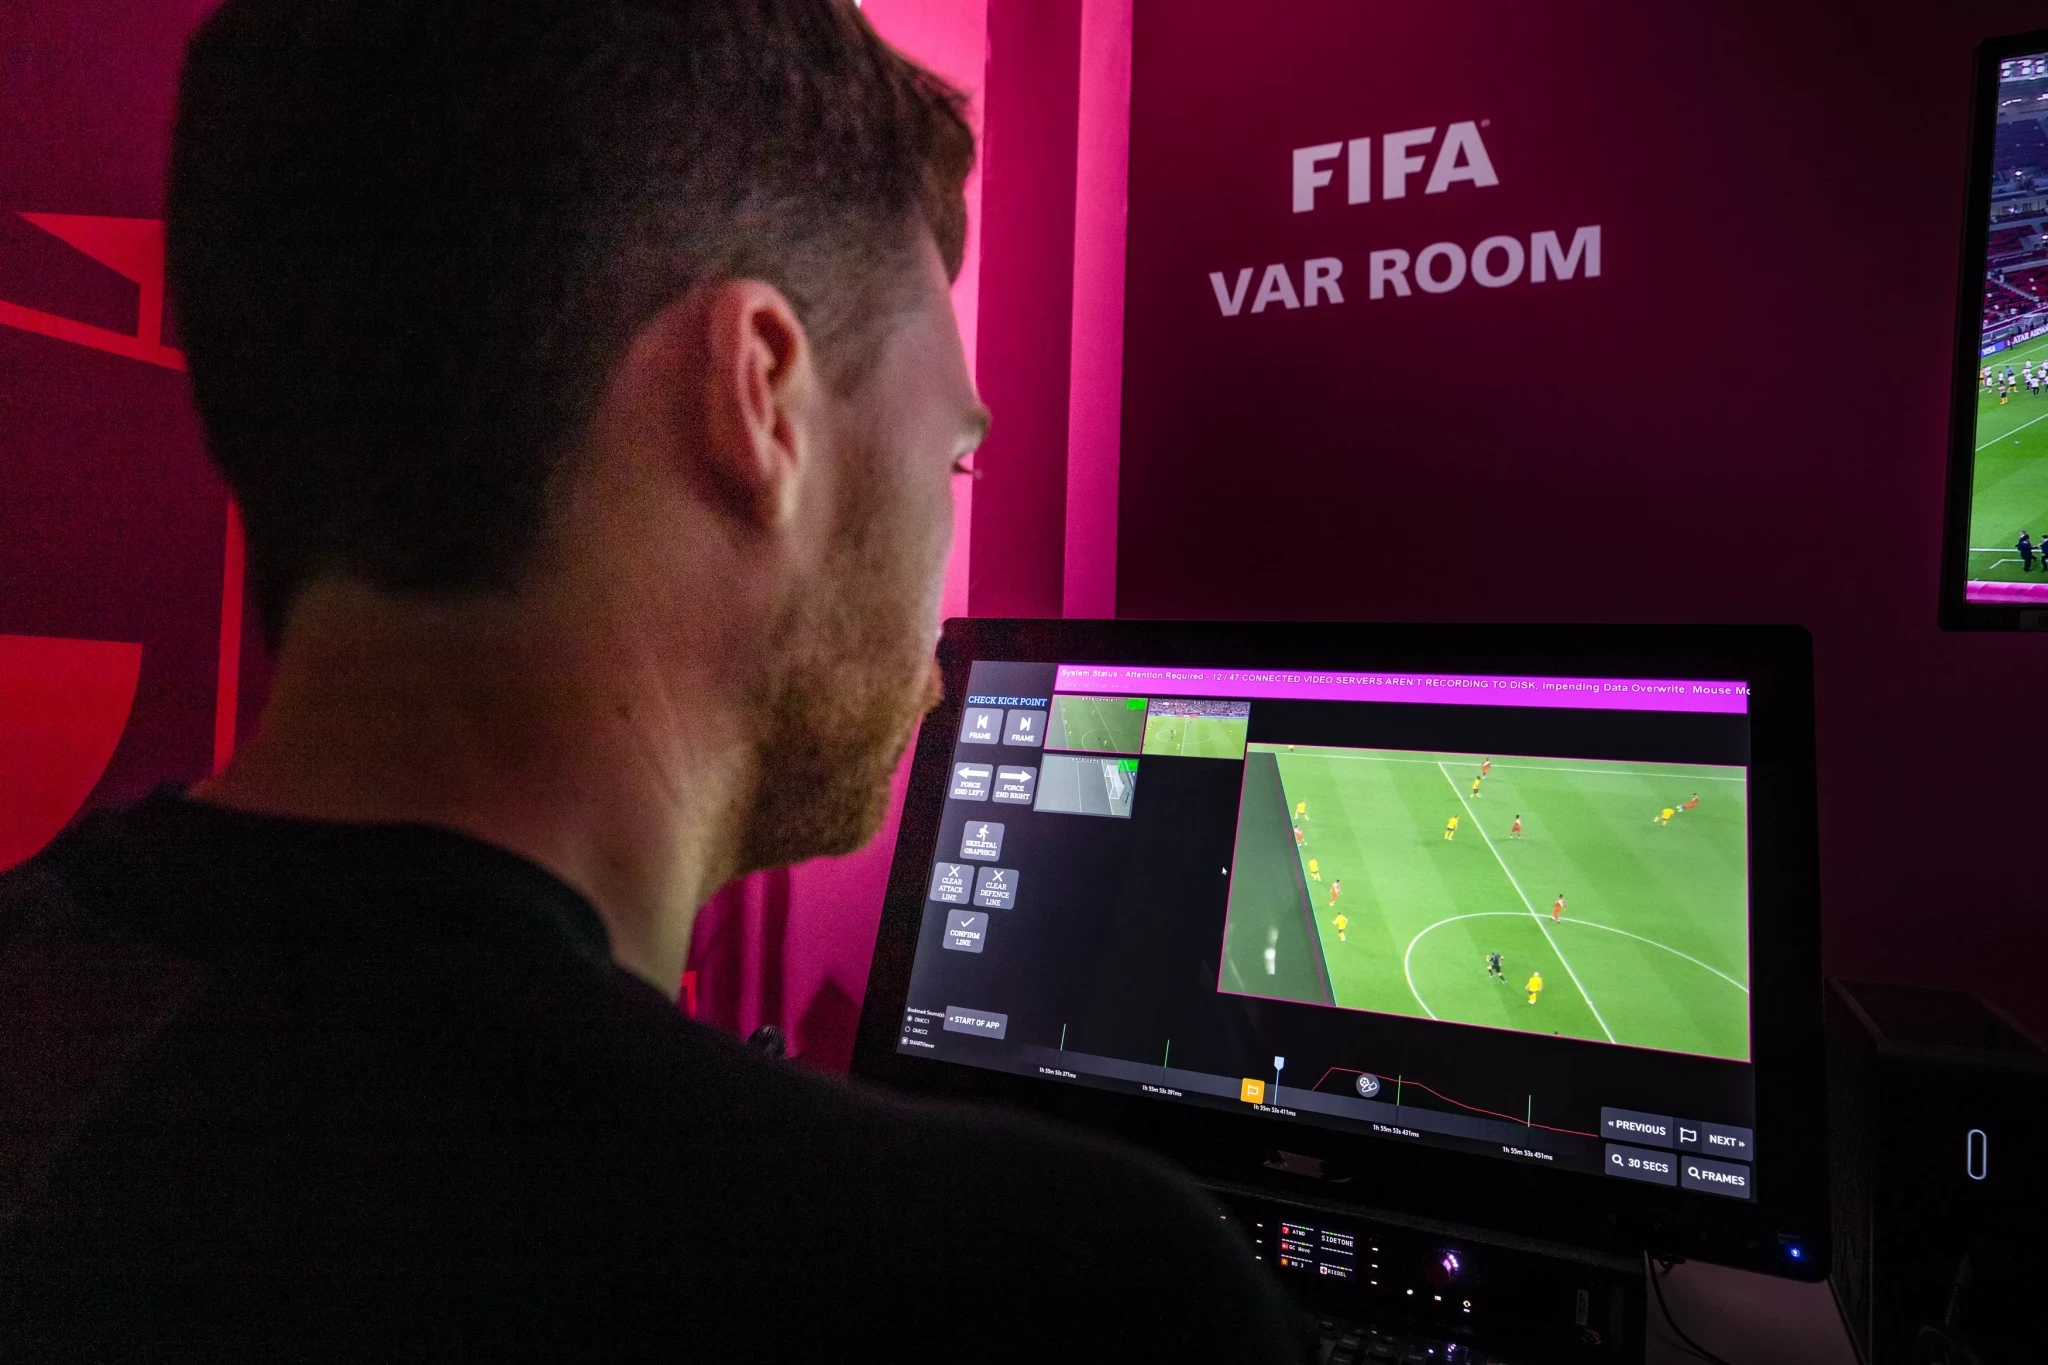  FIFA President Infantino admits VAR “not perfect” but here to stay